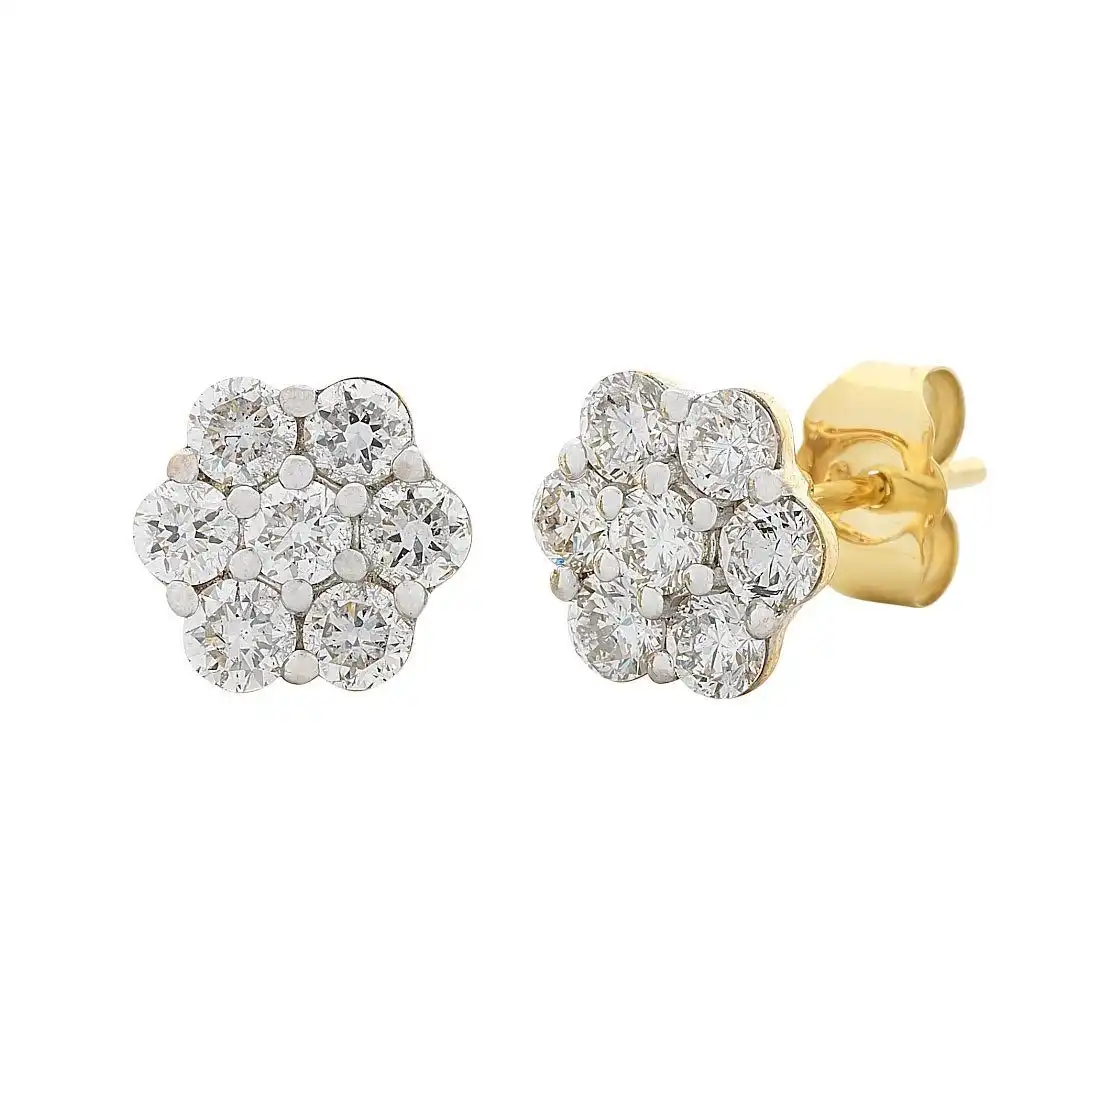 Meera Flower Earrings with 1.00ct of Laboratory Grown Diamonds in 9ct Yellow Gold